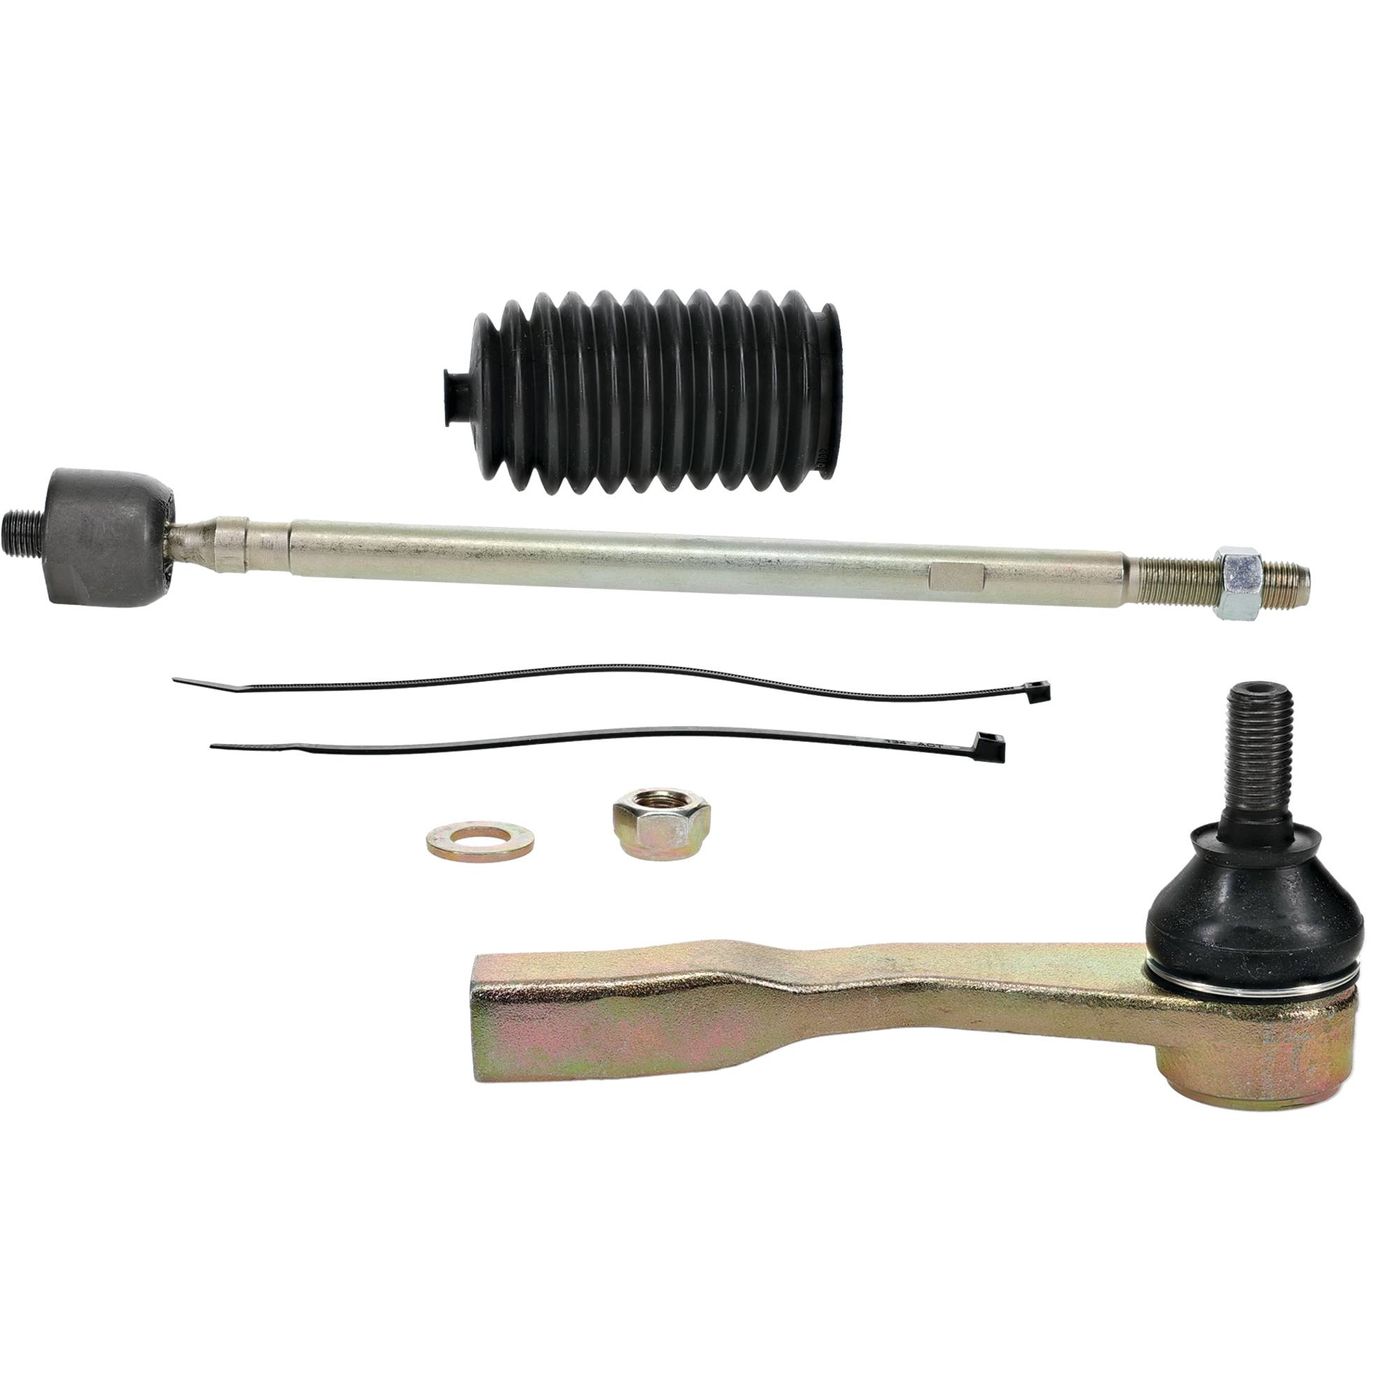 Wrp Tie Rod Ends - WRP511089-L image